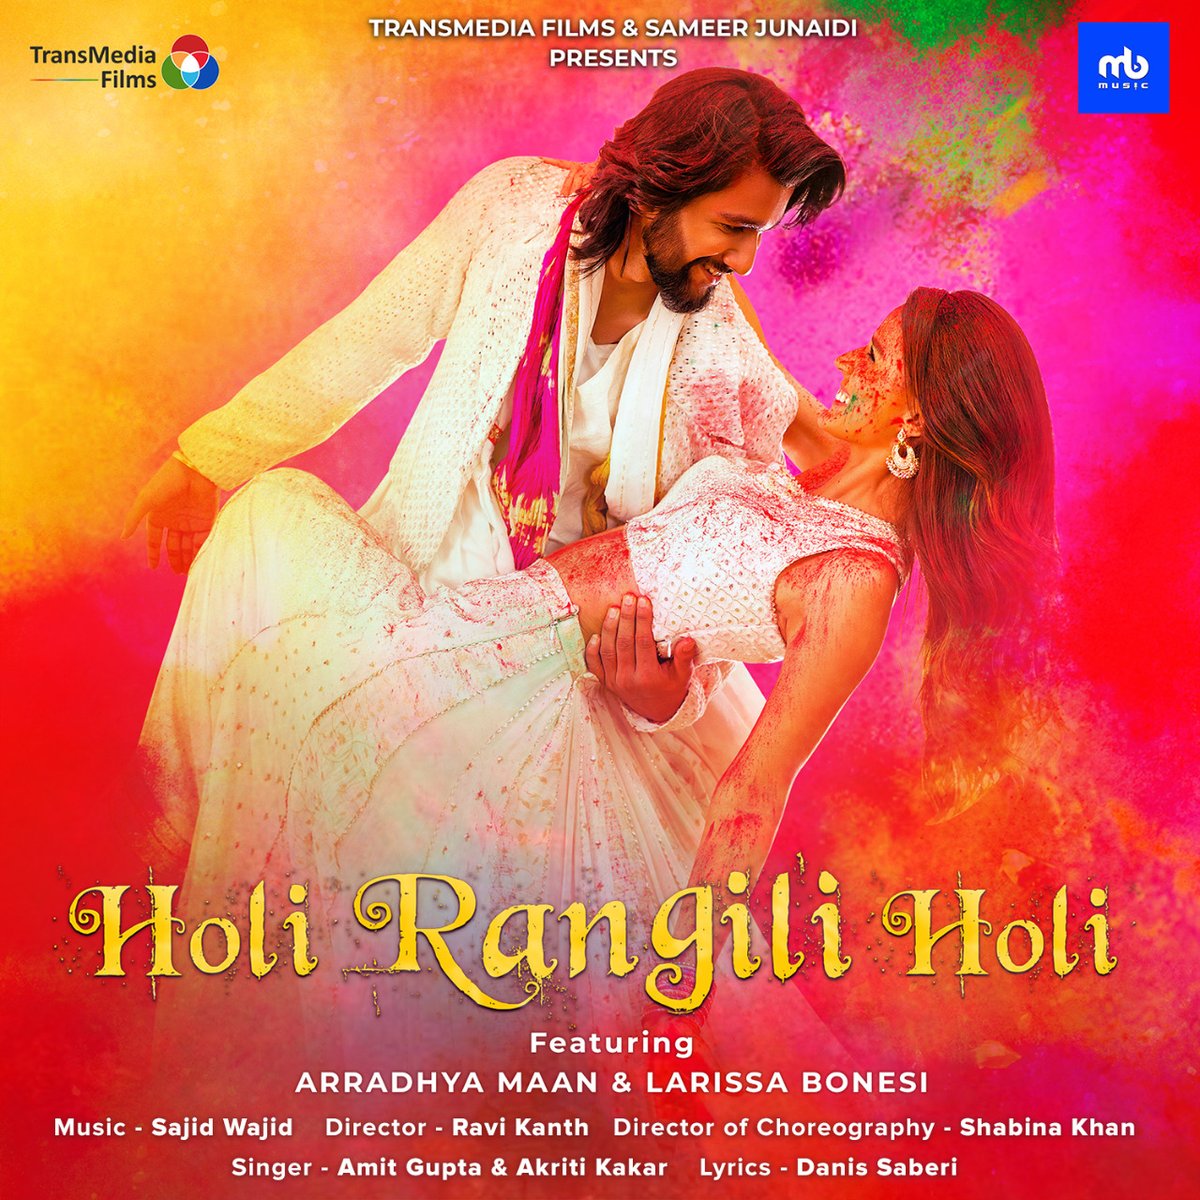 Here’s @TransMediaFin presenting New Holi Song ‘Holi Rangili Holi’. Song is Out Now 💖 Feat me and the very beautiful @larissabonesi choreographed by @Shabinaa_Ent and music by @SajidMusicKhan lovely voice of singer @AMIT_MUSIC @AKRITIMUSIC enjoy youtu.be/GQwOti2ahmY